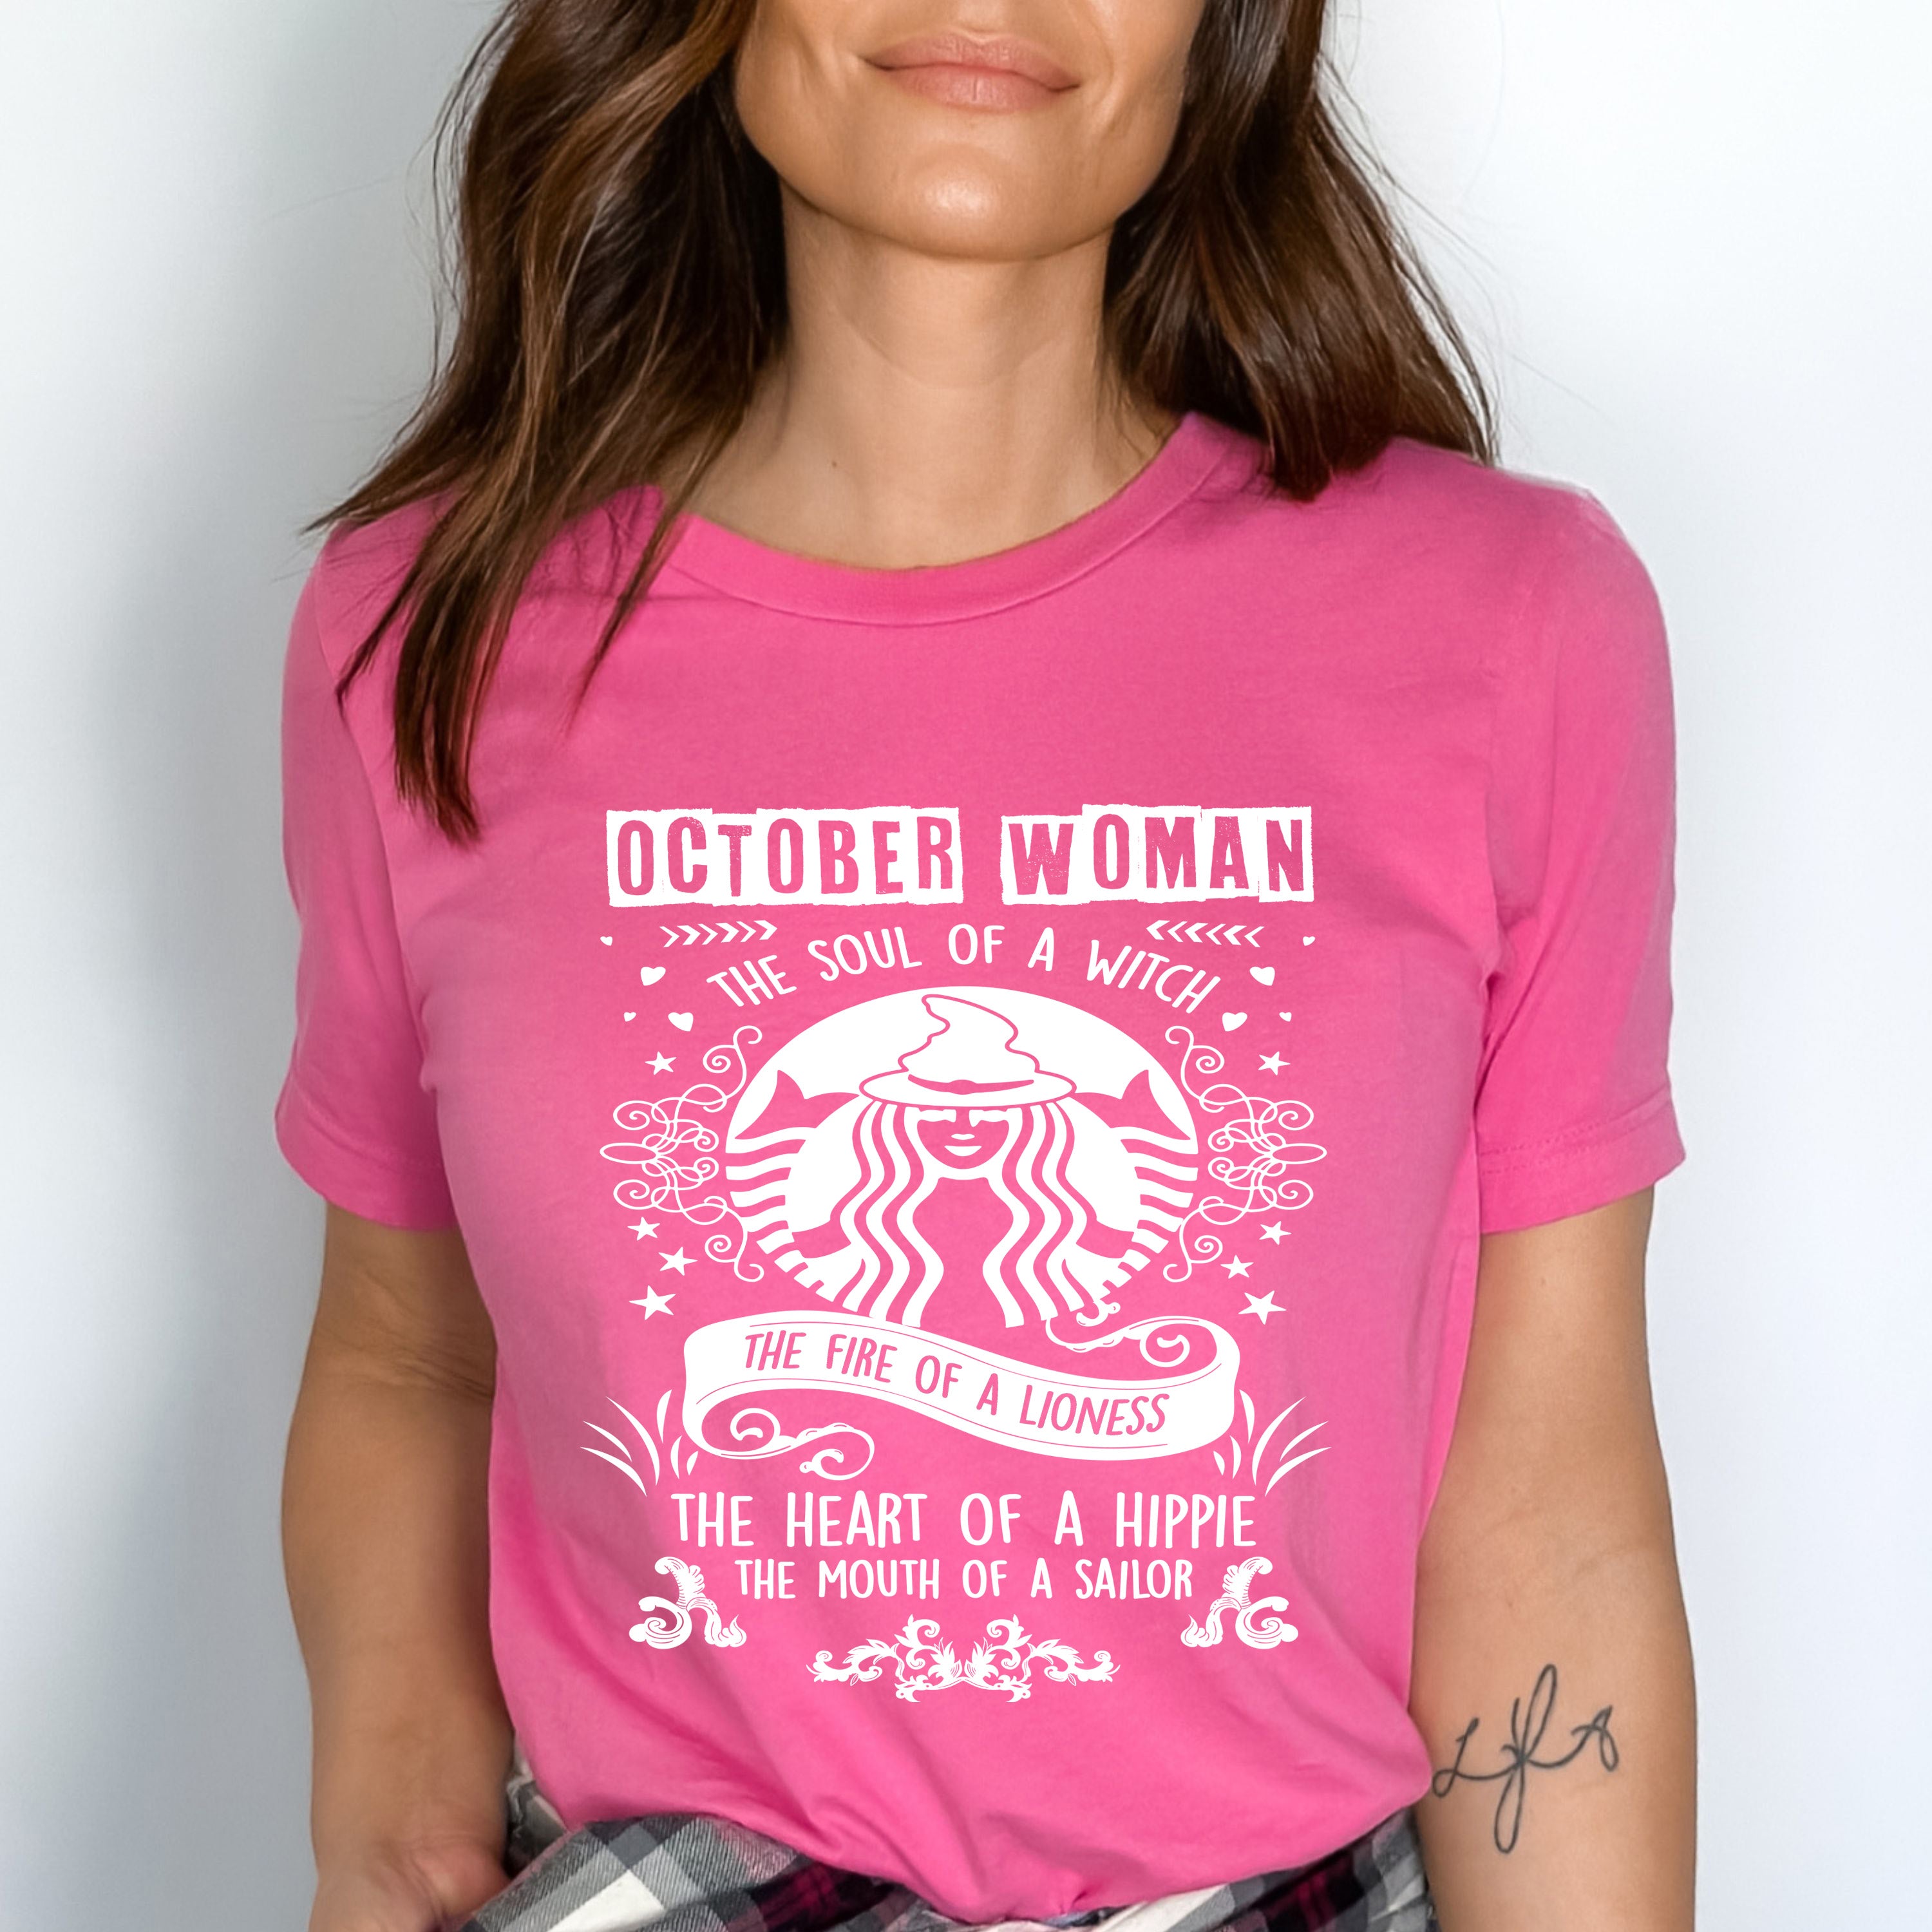 "OCTOBER WOMAN The Soul Of A Witch The Fire Of A Lioness The Heart Of A Hippie...",T-Shirt.